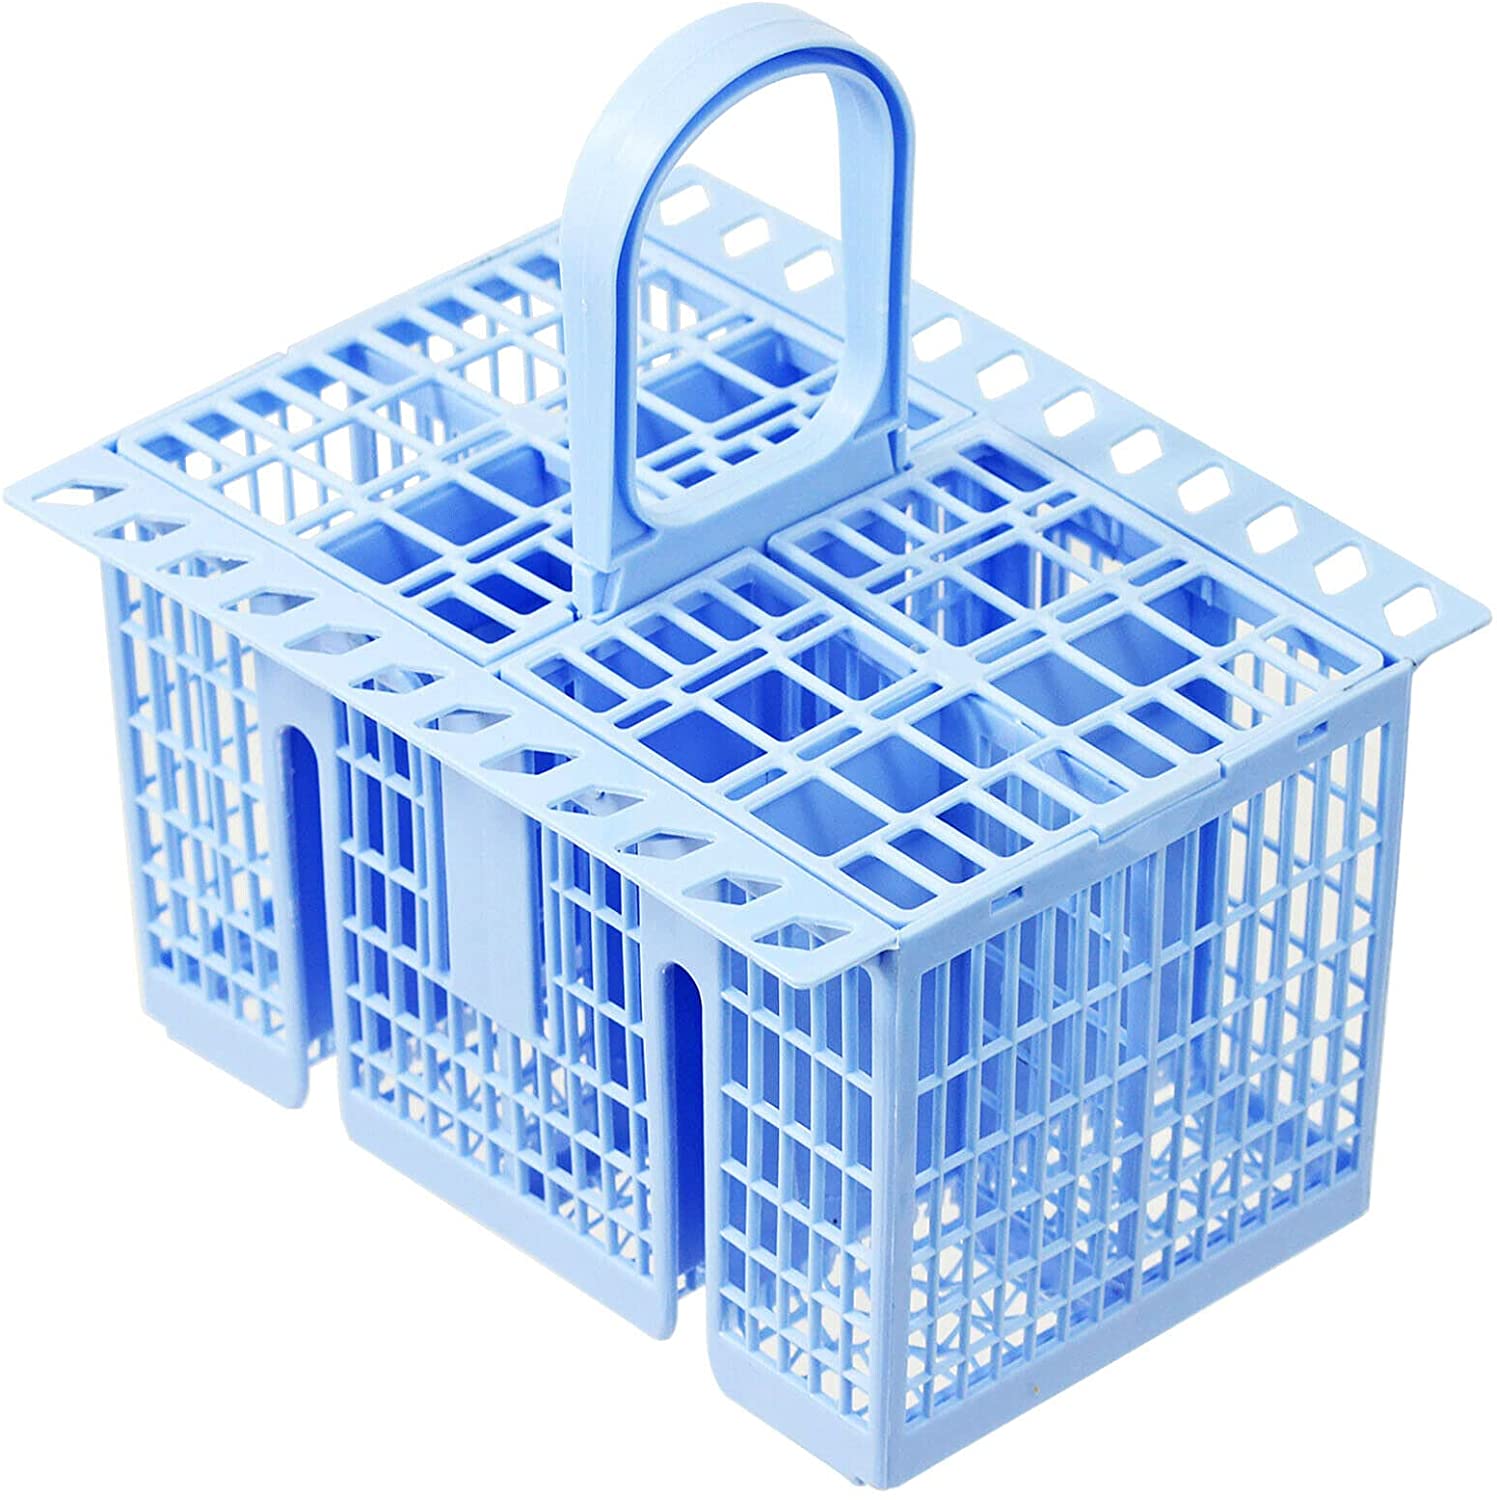 SPARES2GO Cutlery Basket compatible with Zanussi Dishwasher (Blue, 220 x 208 x 160mm)